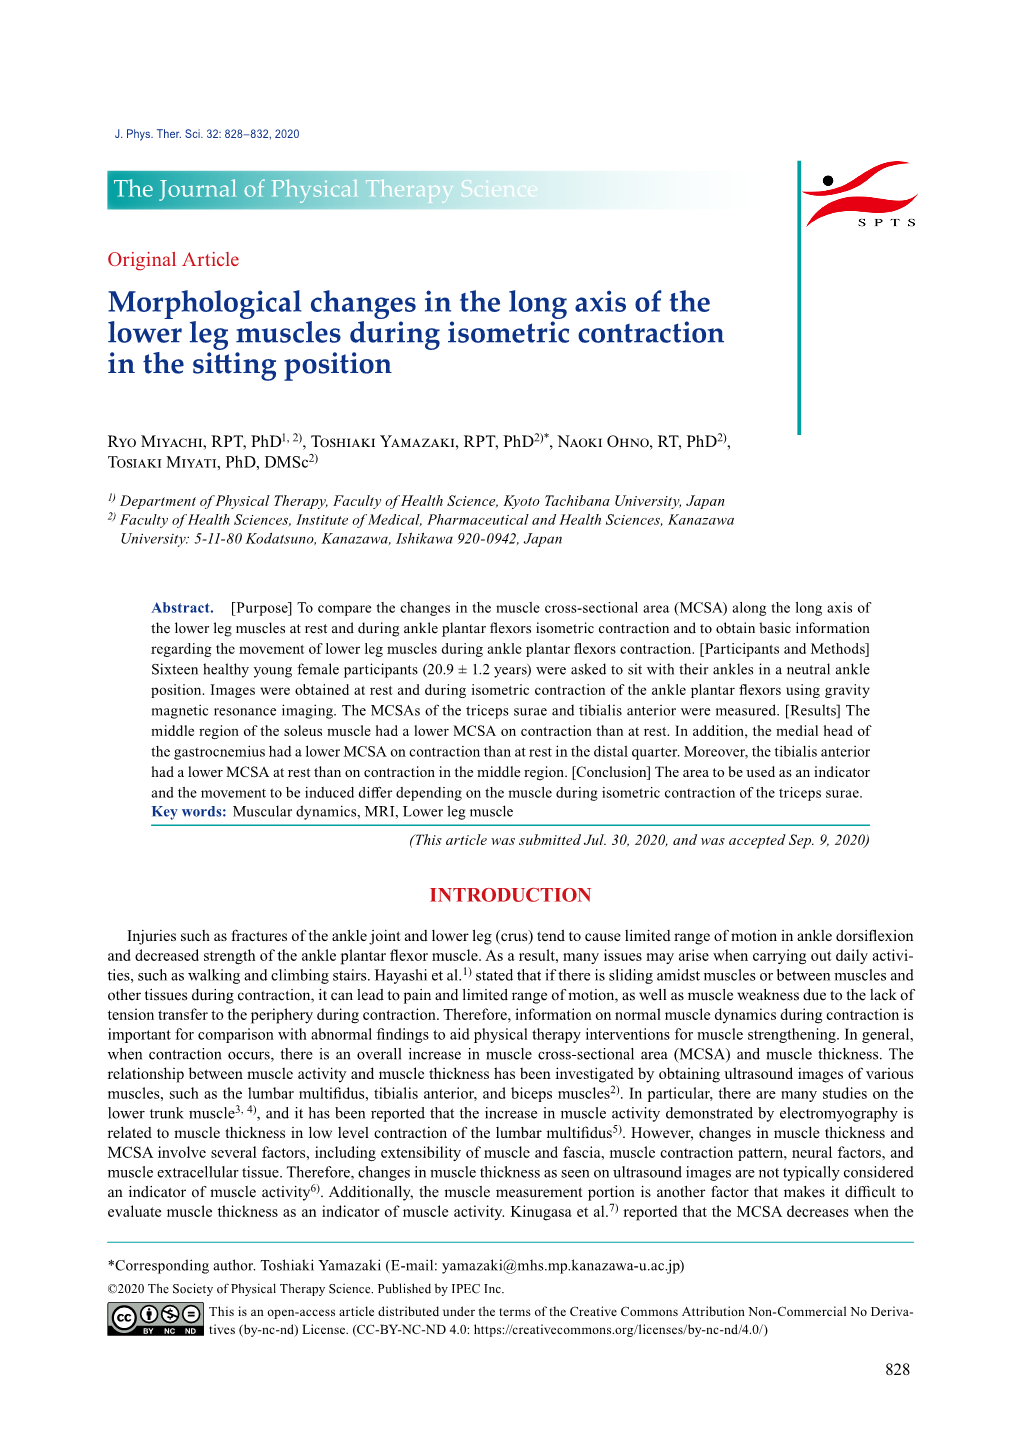 Morphological Changes in the Long Axis of the Lower Leg Muscles During Isometric Contraction in the Sitting Position